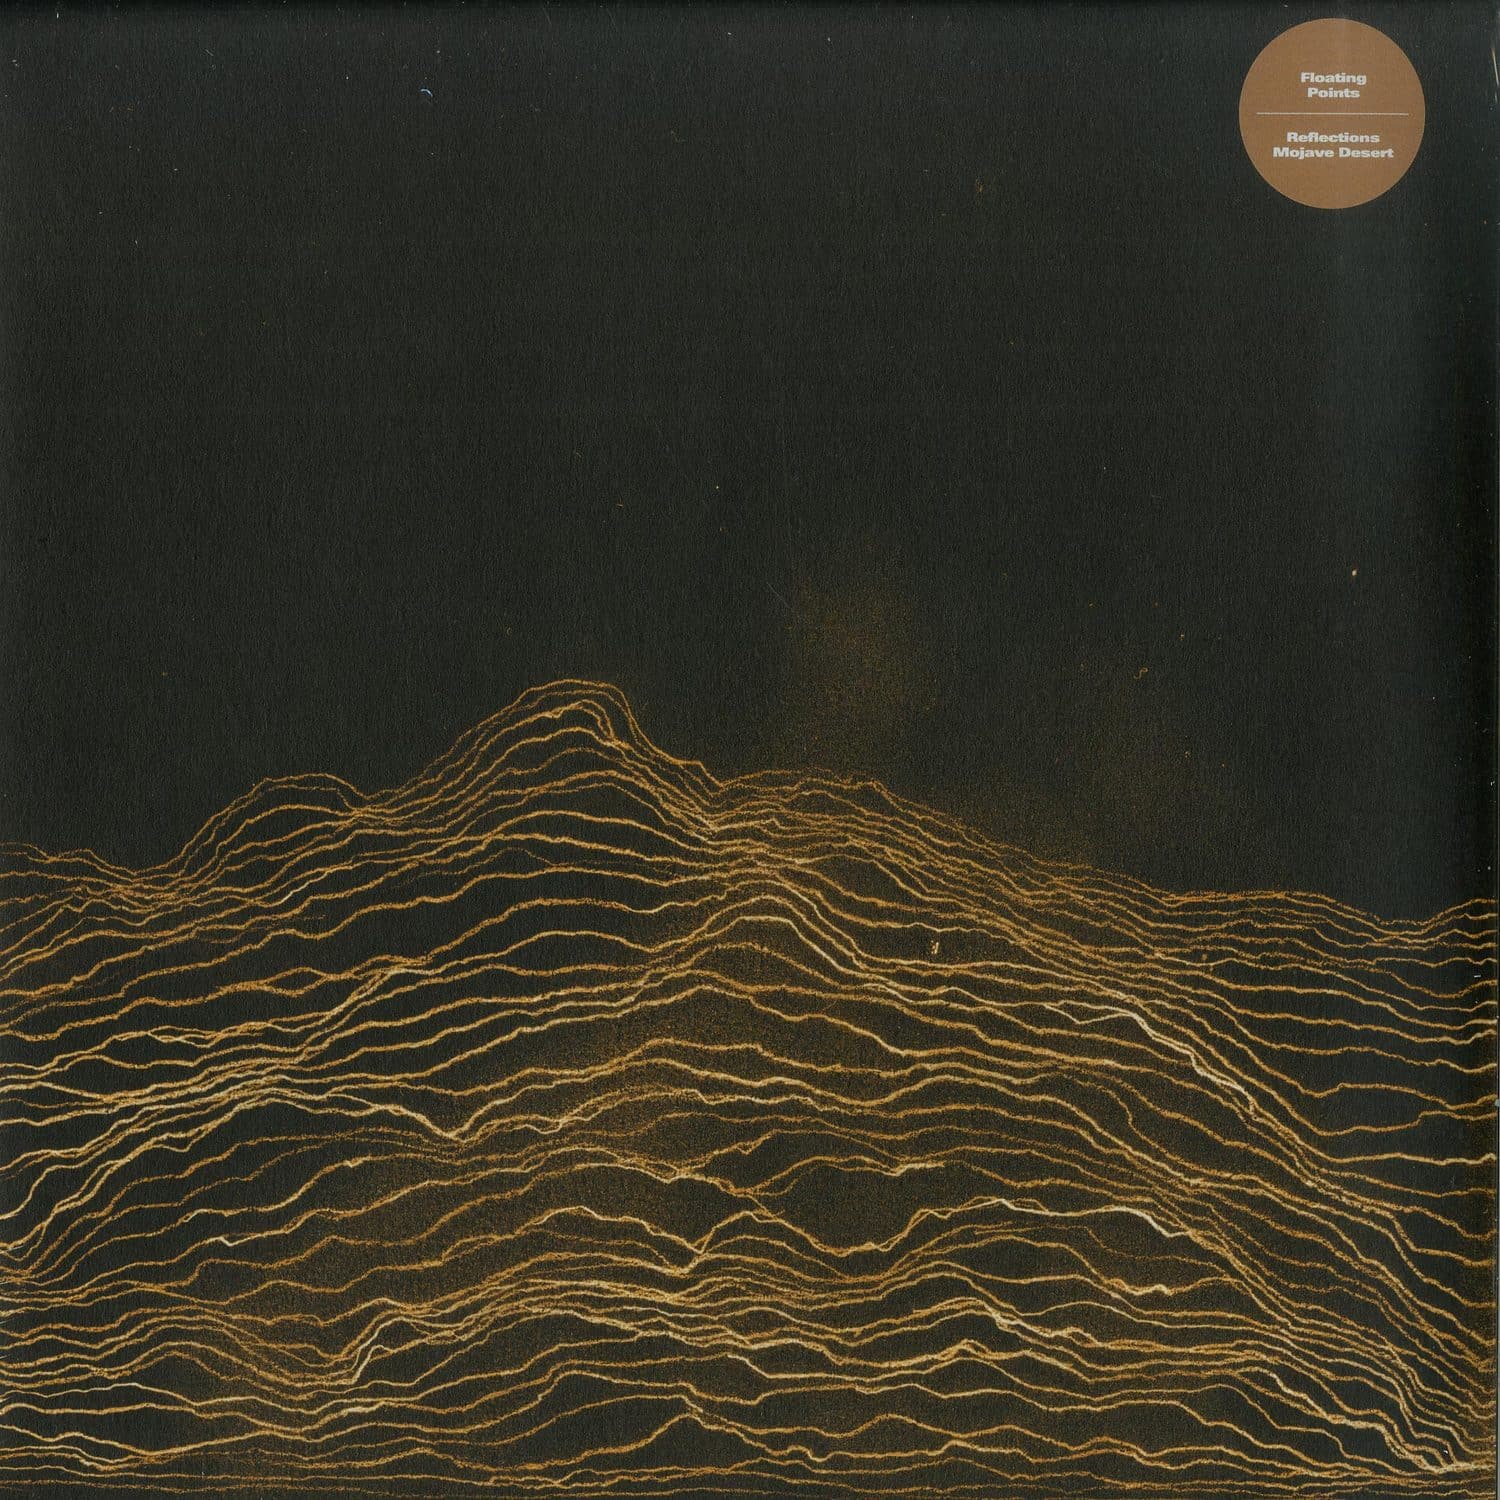 Floating Points - REFLECTIONS: MOJAVE DESERT 